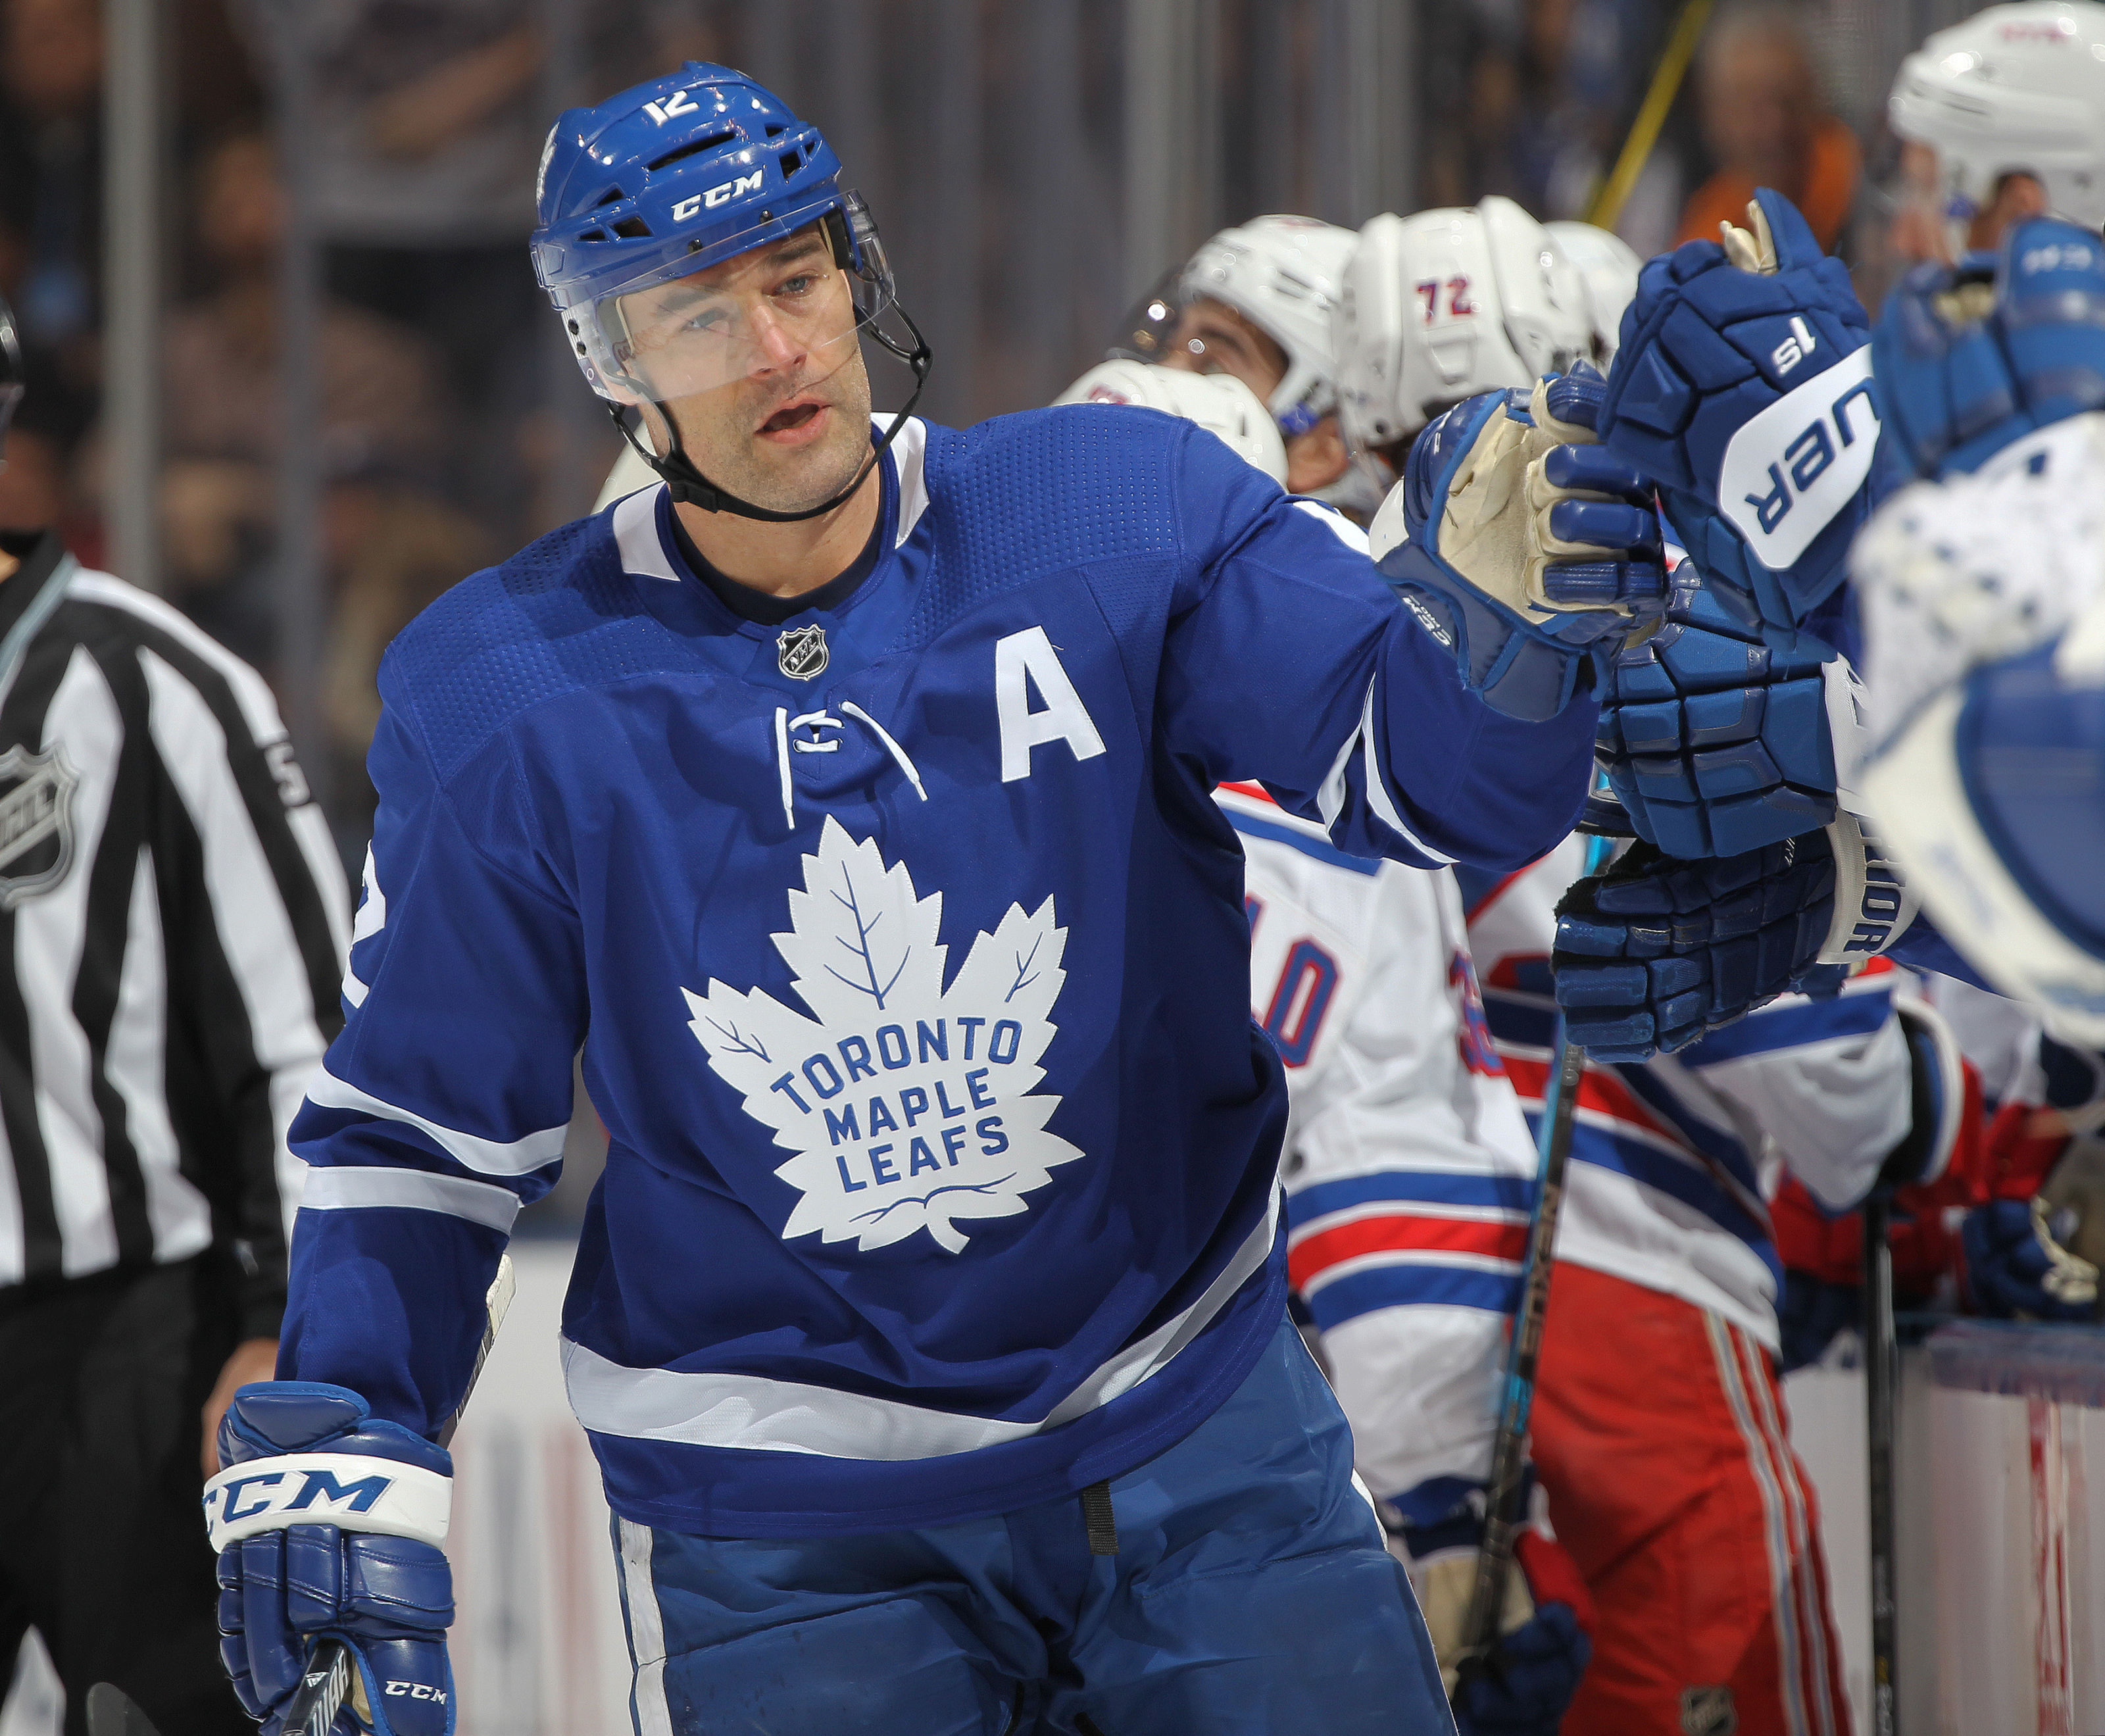 Patrick Marleau would 'seriously consider' trade to contender